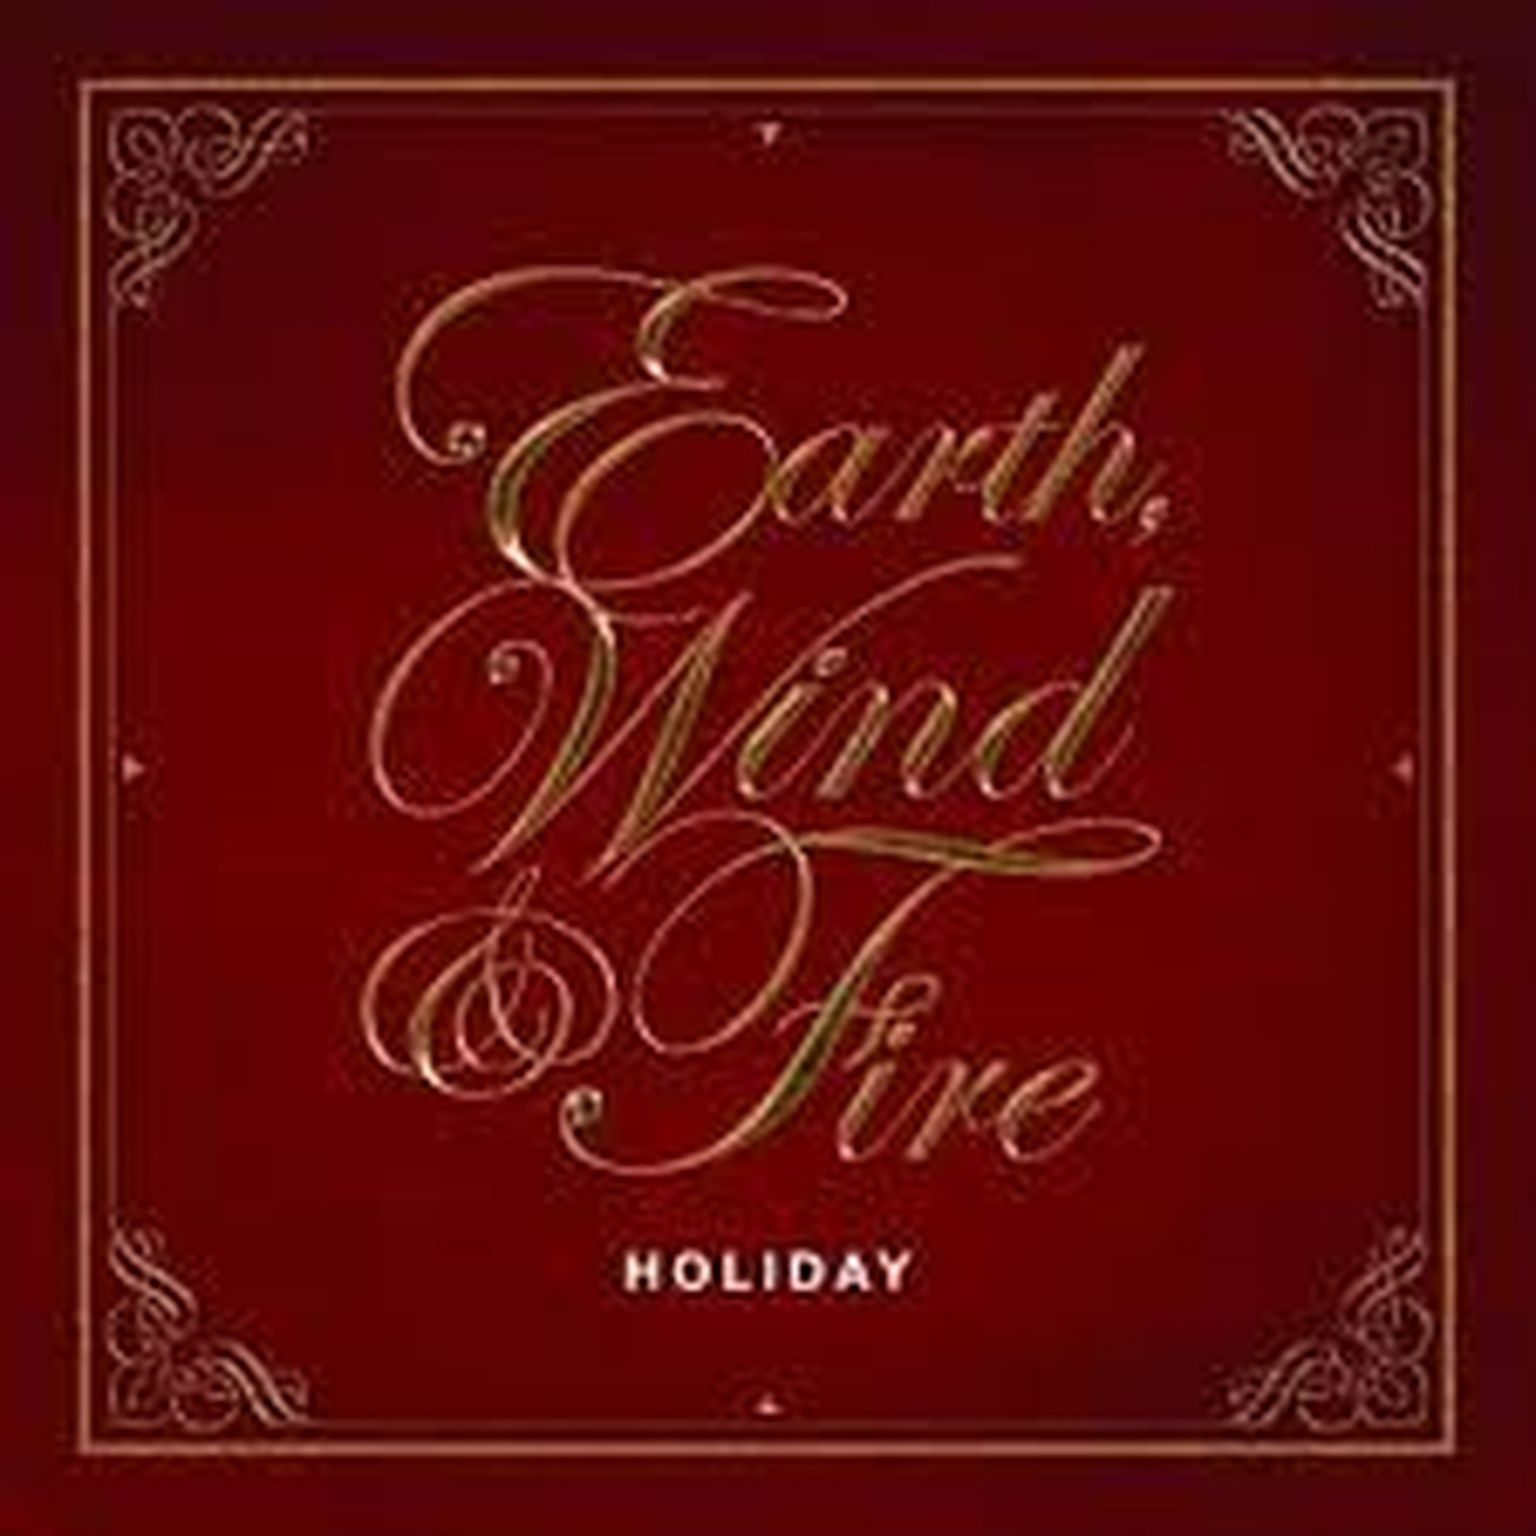 Earth, Wind & Fire- Holiday